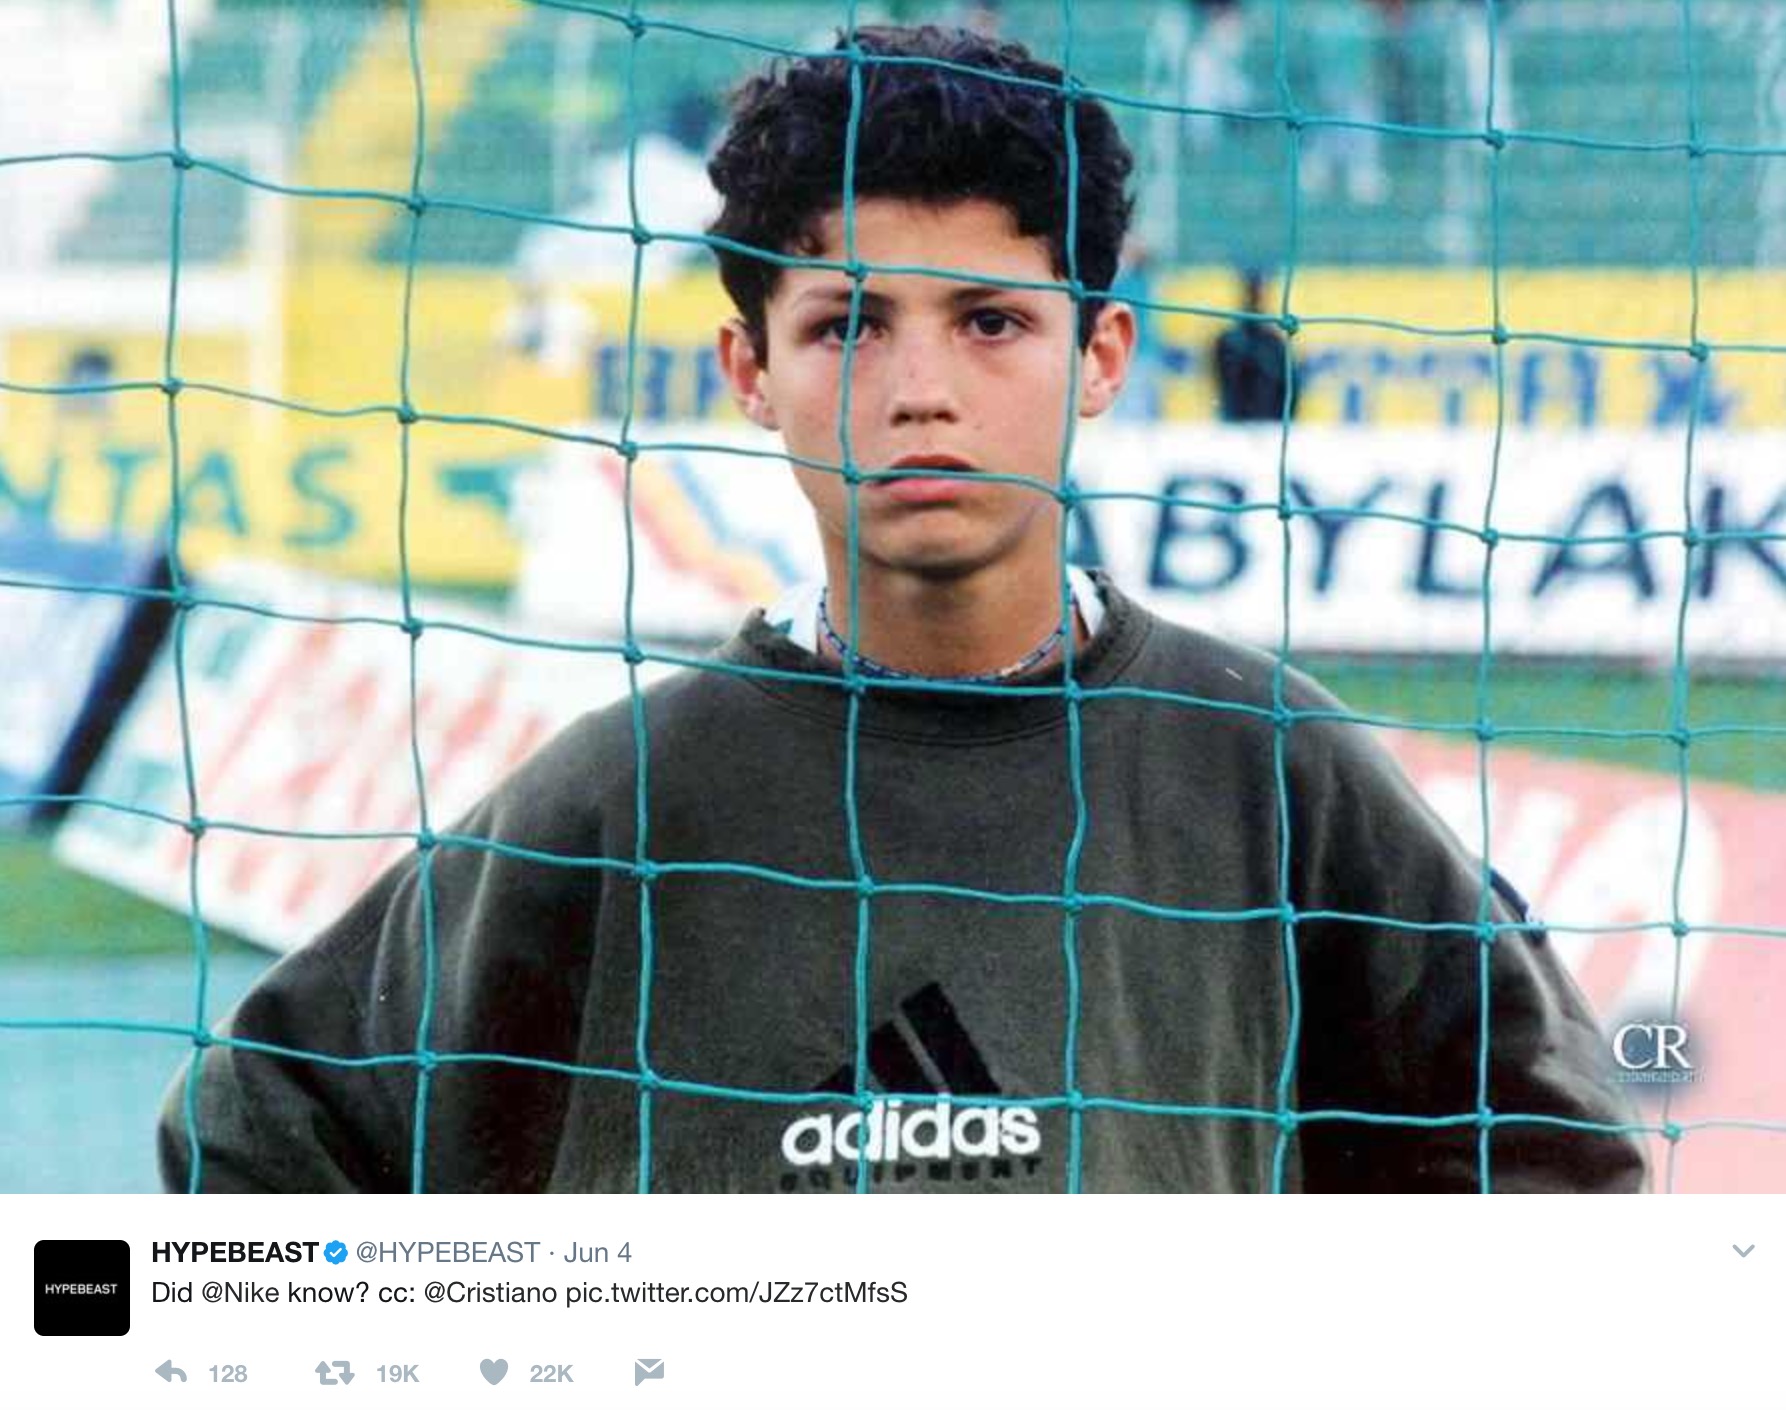 Nike thought it could get away with image of young Cristiano Ronaldo Adidas in ad | For The Win